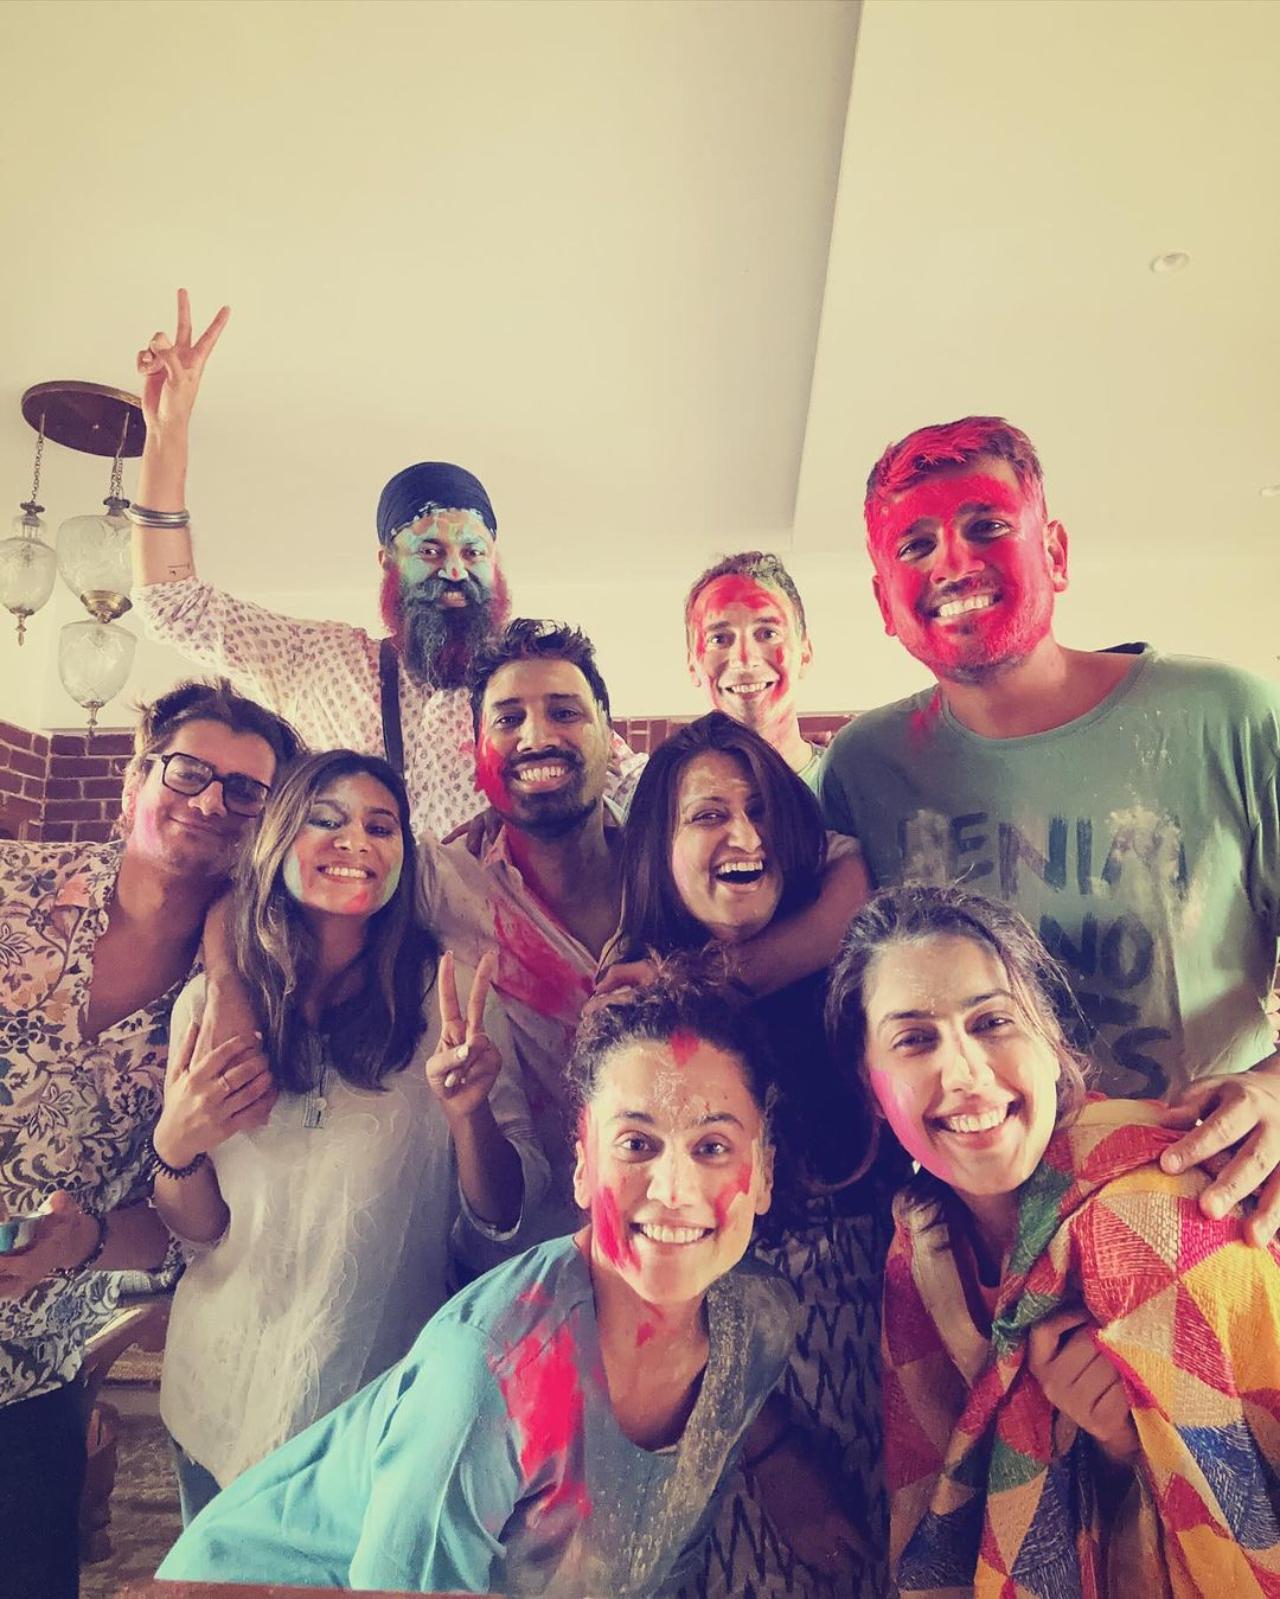 Taapsee Pannu and her beau Mathias Boe were seen playing Holi with friends hours after reports of their marriage surfaced